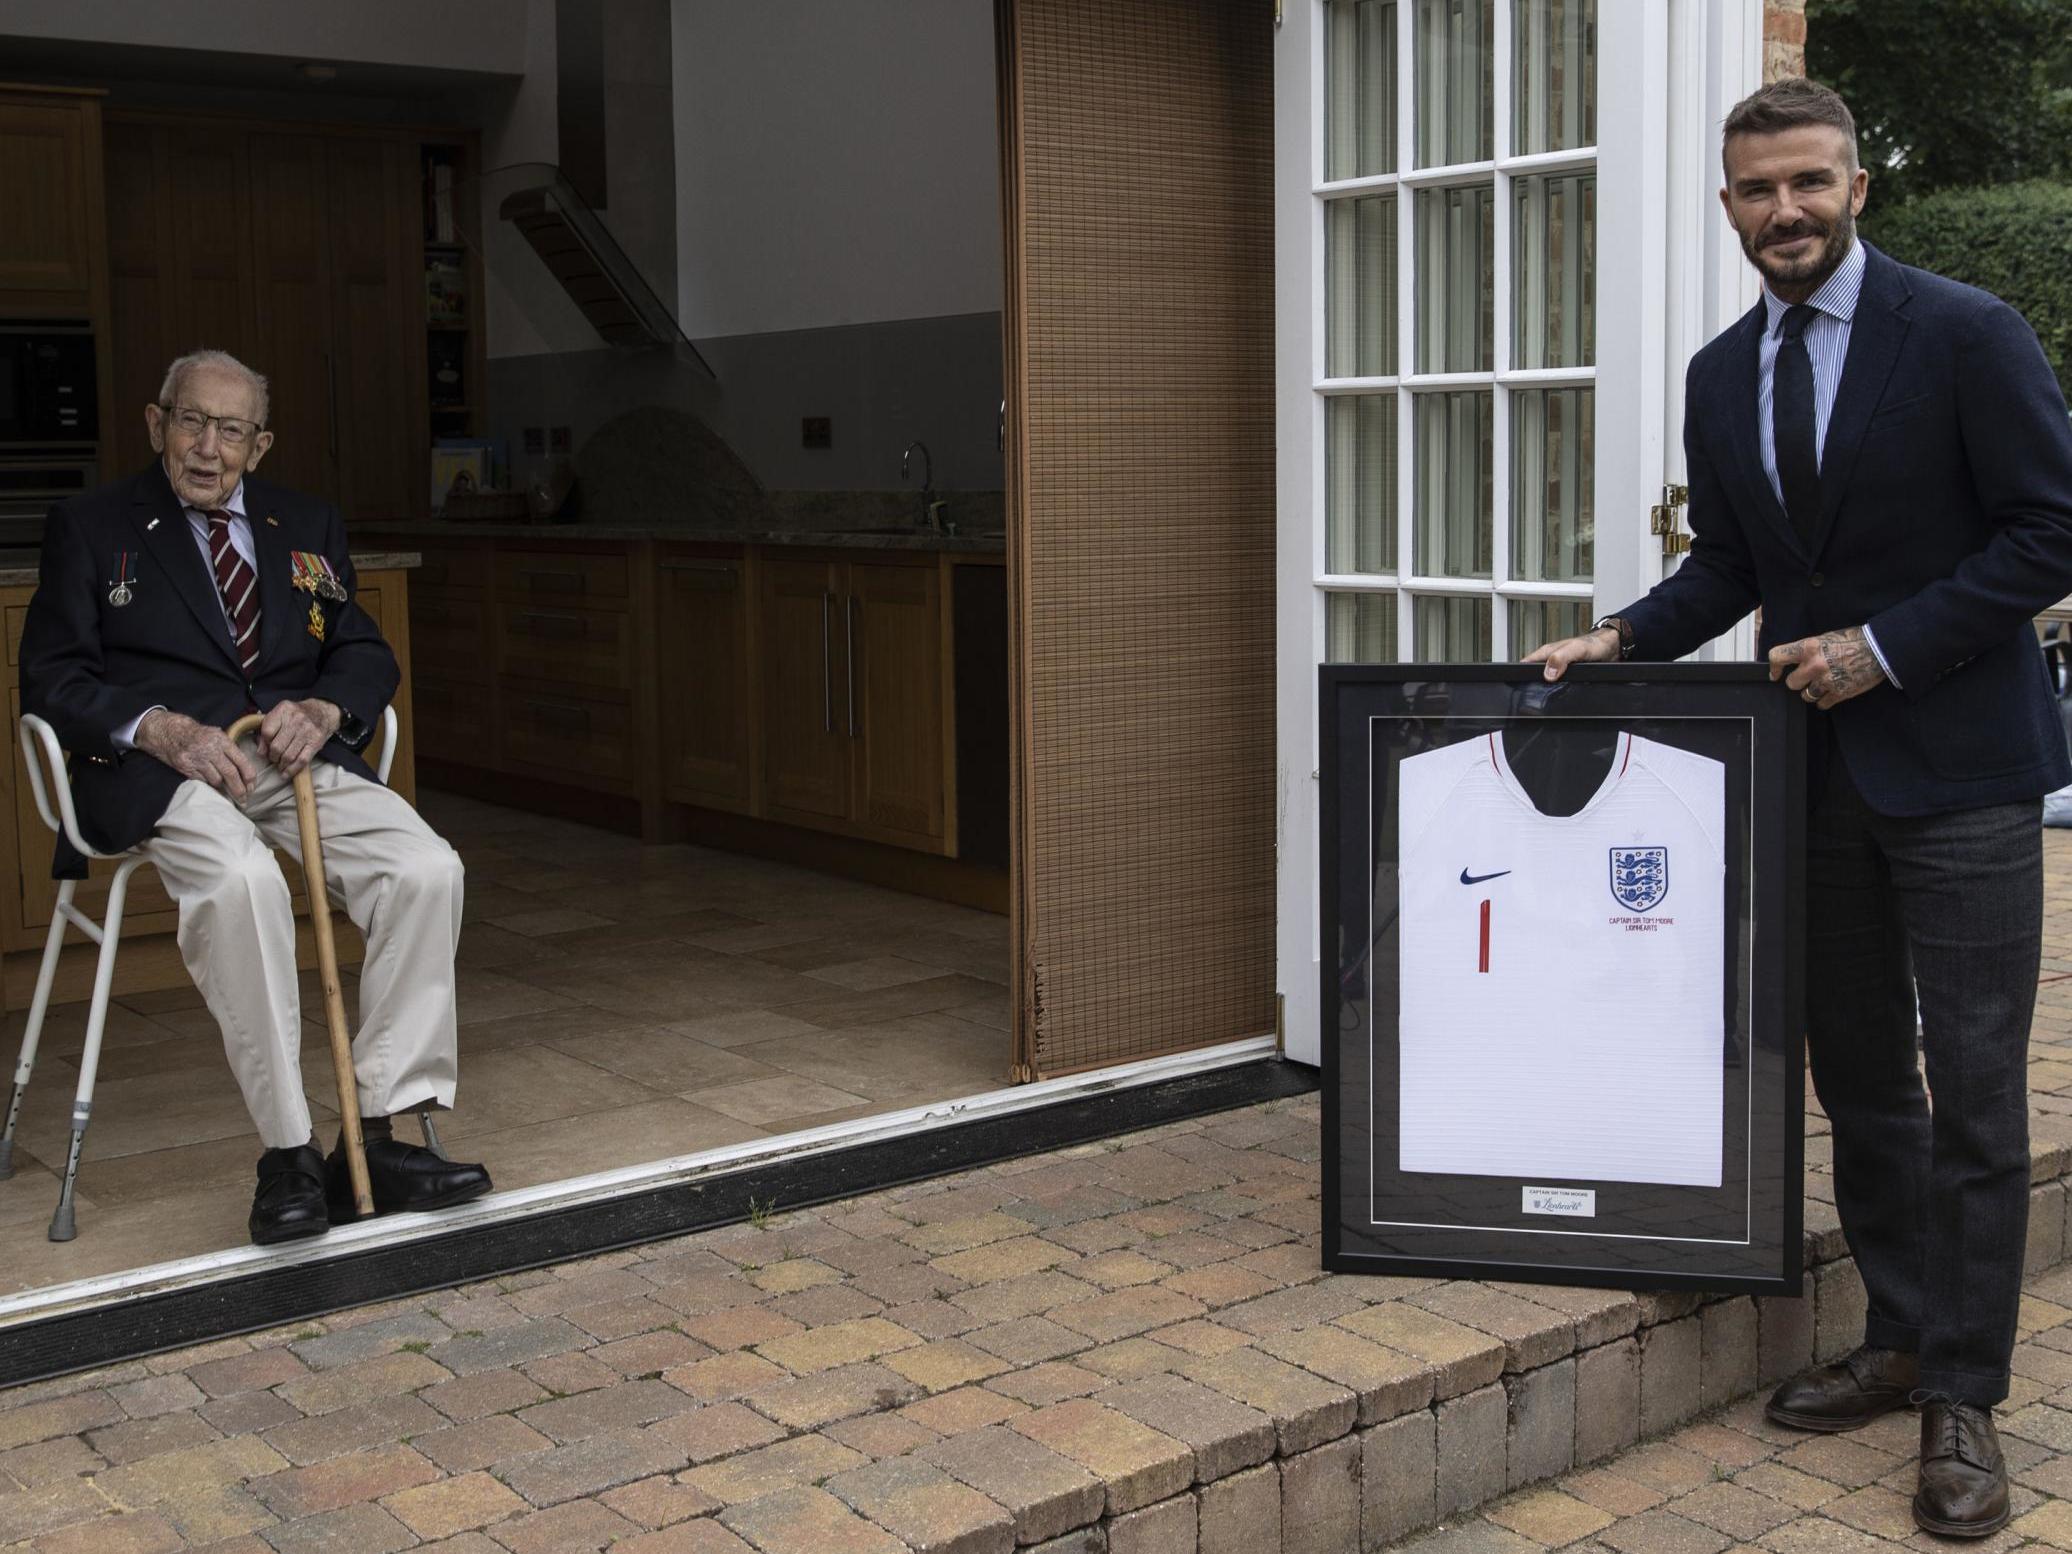 Captain Sir Tom Moore Honoured By David Beckham And Fa As Leader Of Lionhearts Inspirational Heroes Team The Independent The Independent